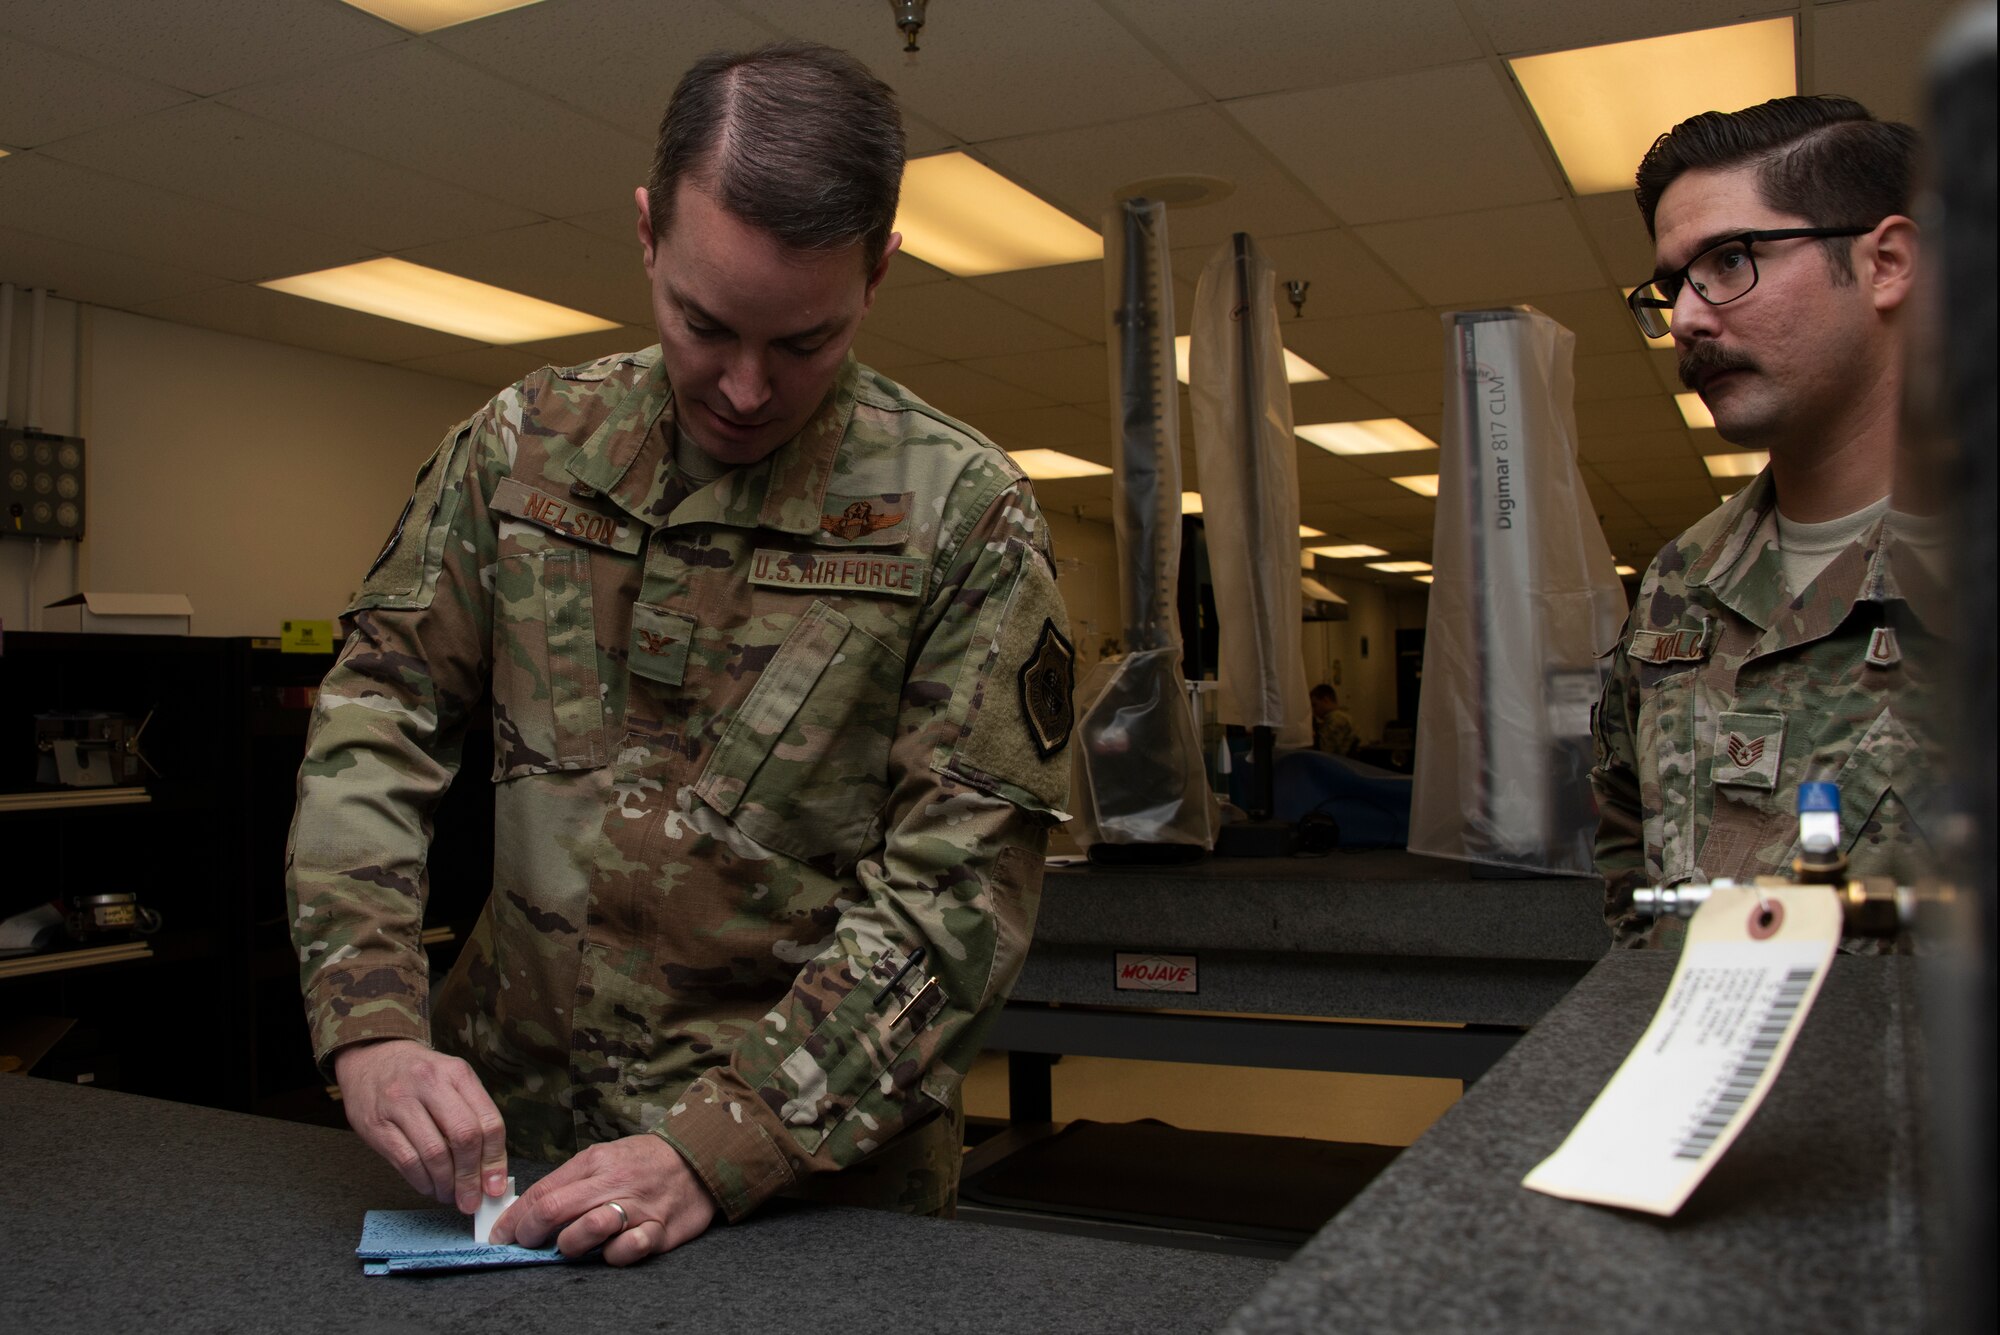 U.S. Air Force Col. Jeff Nelson, left, 60th Air Mobility Wing commander, works with gauge blocks inside the 60th Maintenance Squadron Precision Measurement Equipment Laboratory Nov. 1, 2019 while Staff Sgt. Vincenzo Kupilow, right, 60th MXS physical dimensional craftsman, looks on during a Leadership Rounds visit at Travis Air Force Base, California. The PMEL team is responsible for ensuring the accuracy of test equipment for 255 work centers. The Leadership Rounds program provides 60th AMW leadership an opportunity to interact with Airmen to get a detailed view of each mission performed at Travis AFB. (U.S. Air Force photo by Tech. Sgt. James Hodgman)